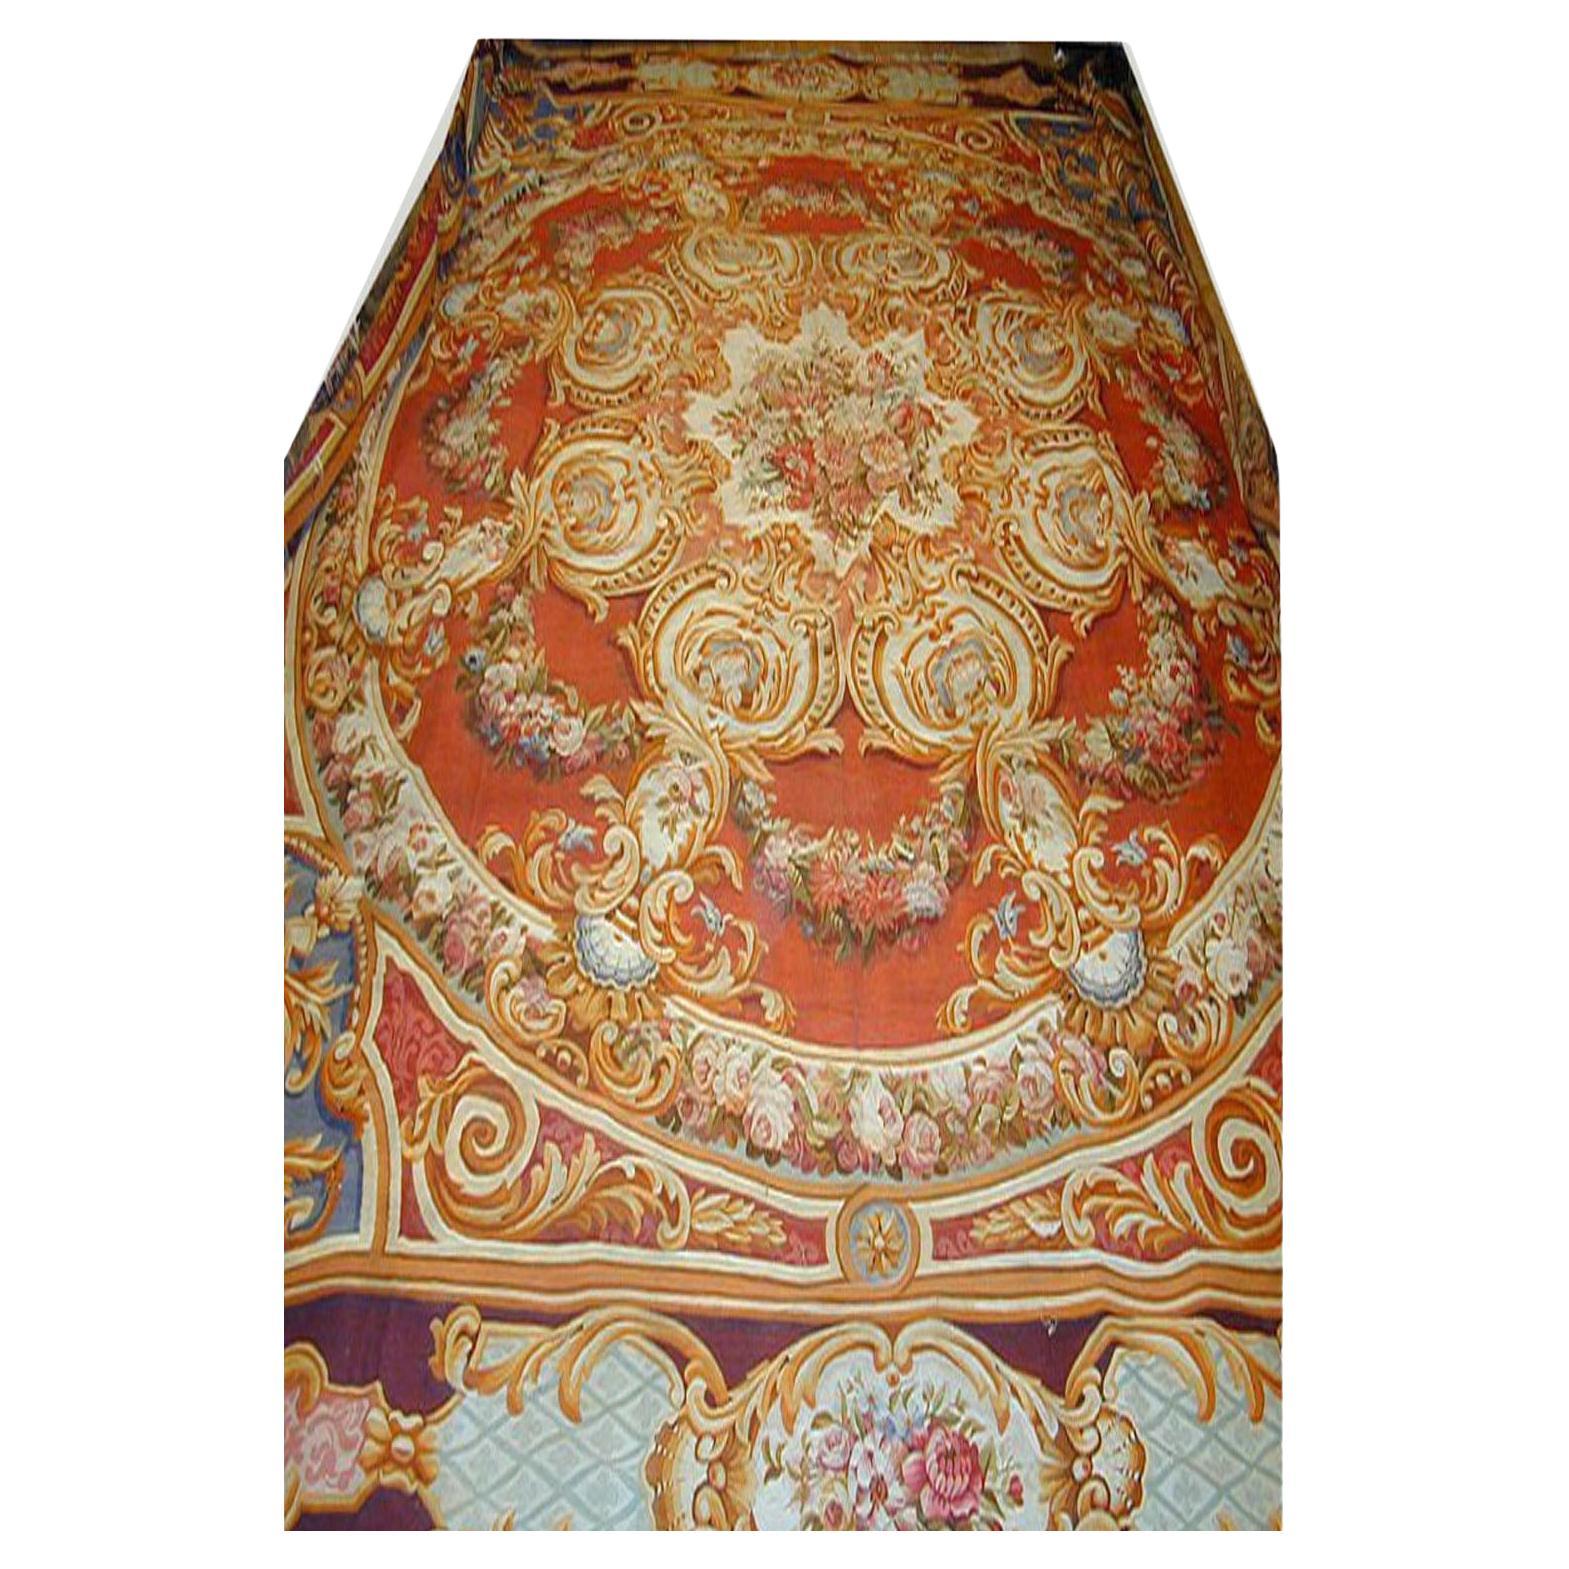 Oversize Antique French Aubusson Rug  15'5 x 18' For Sale